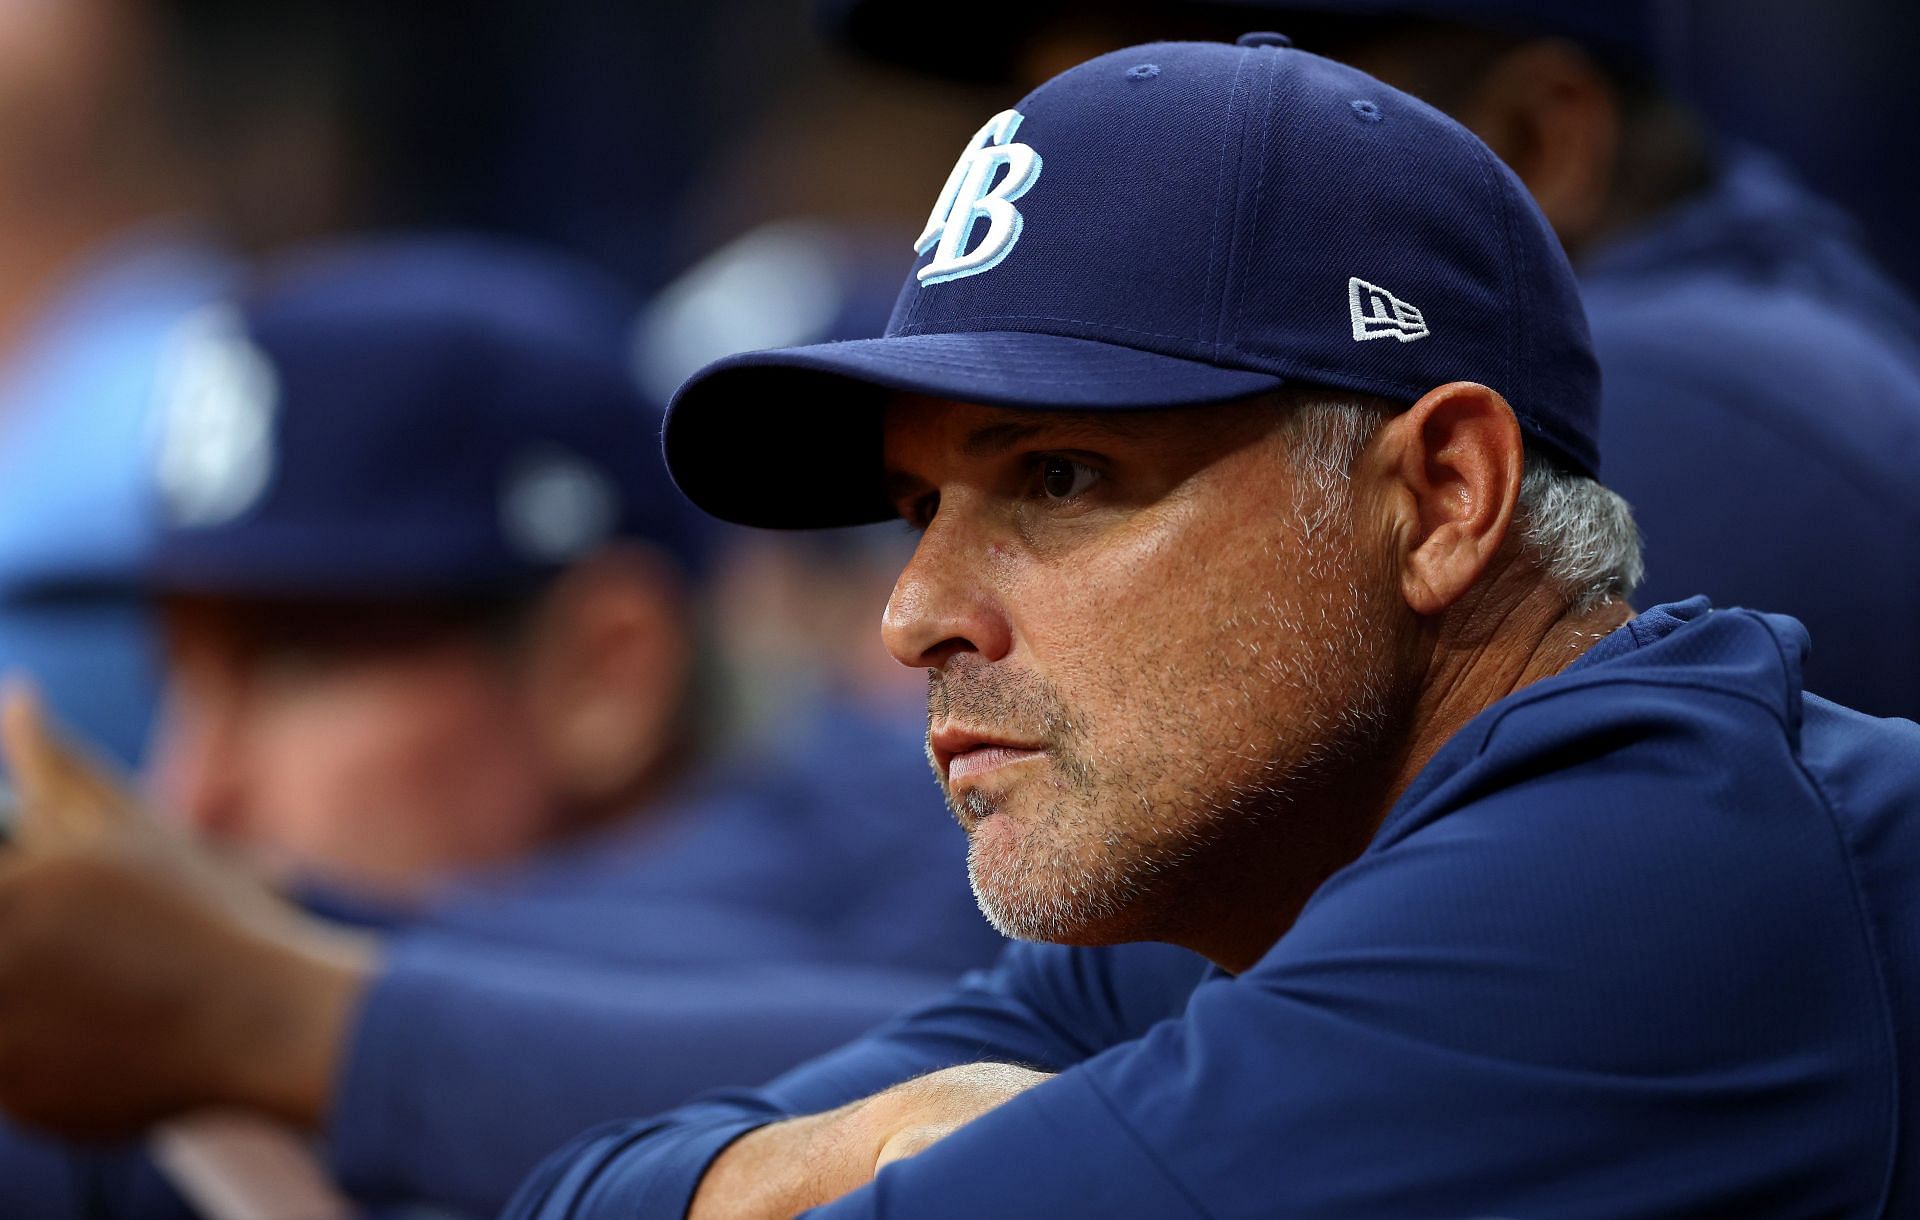 Rays management has been able to put together a competitive team with a low payroll.